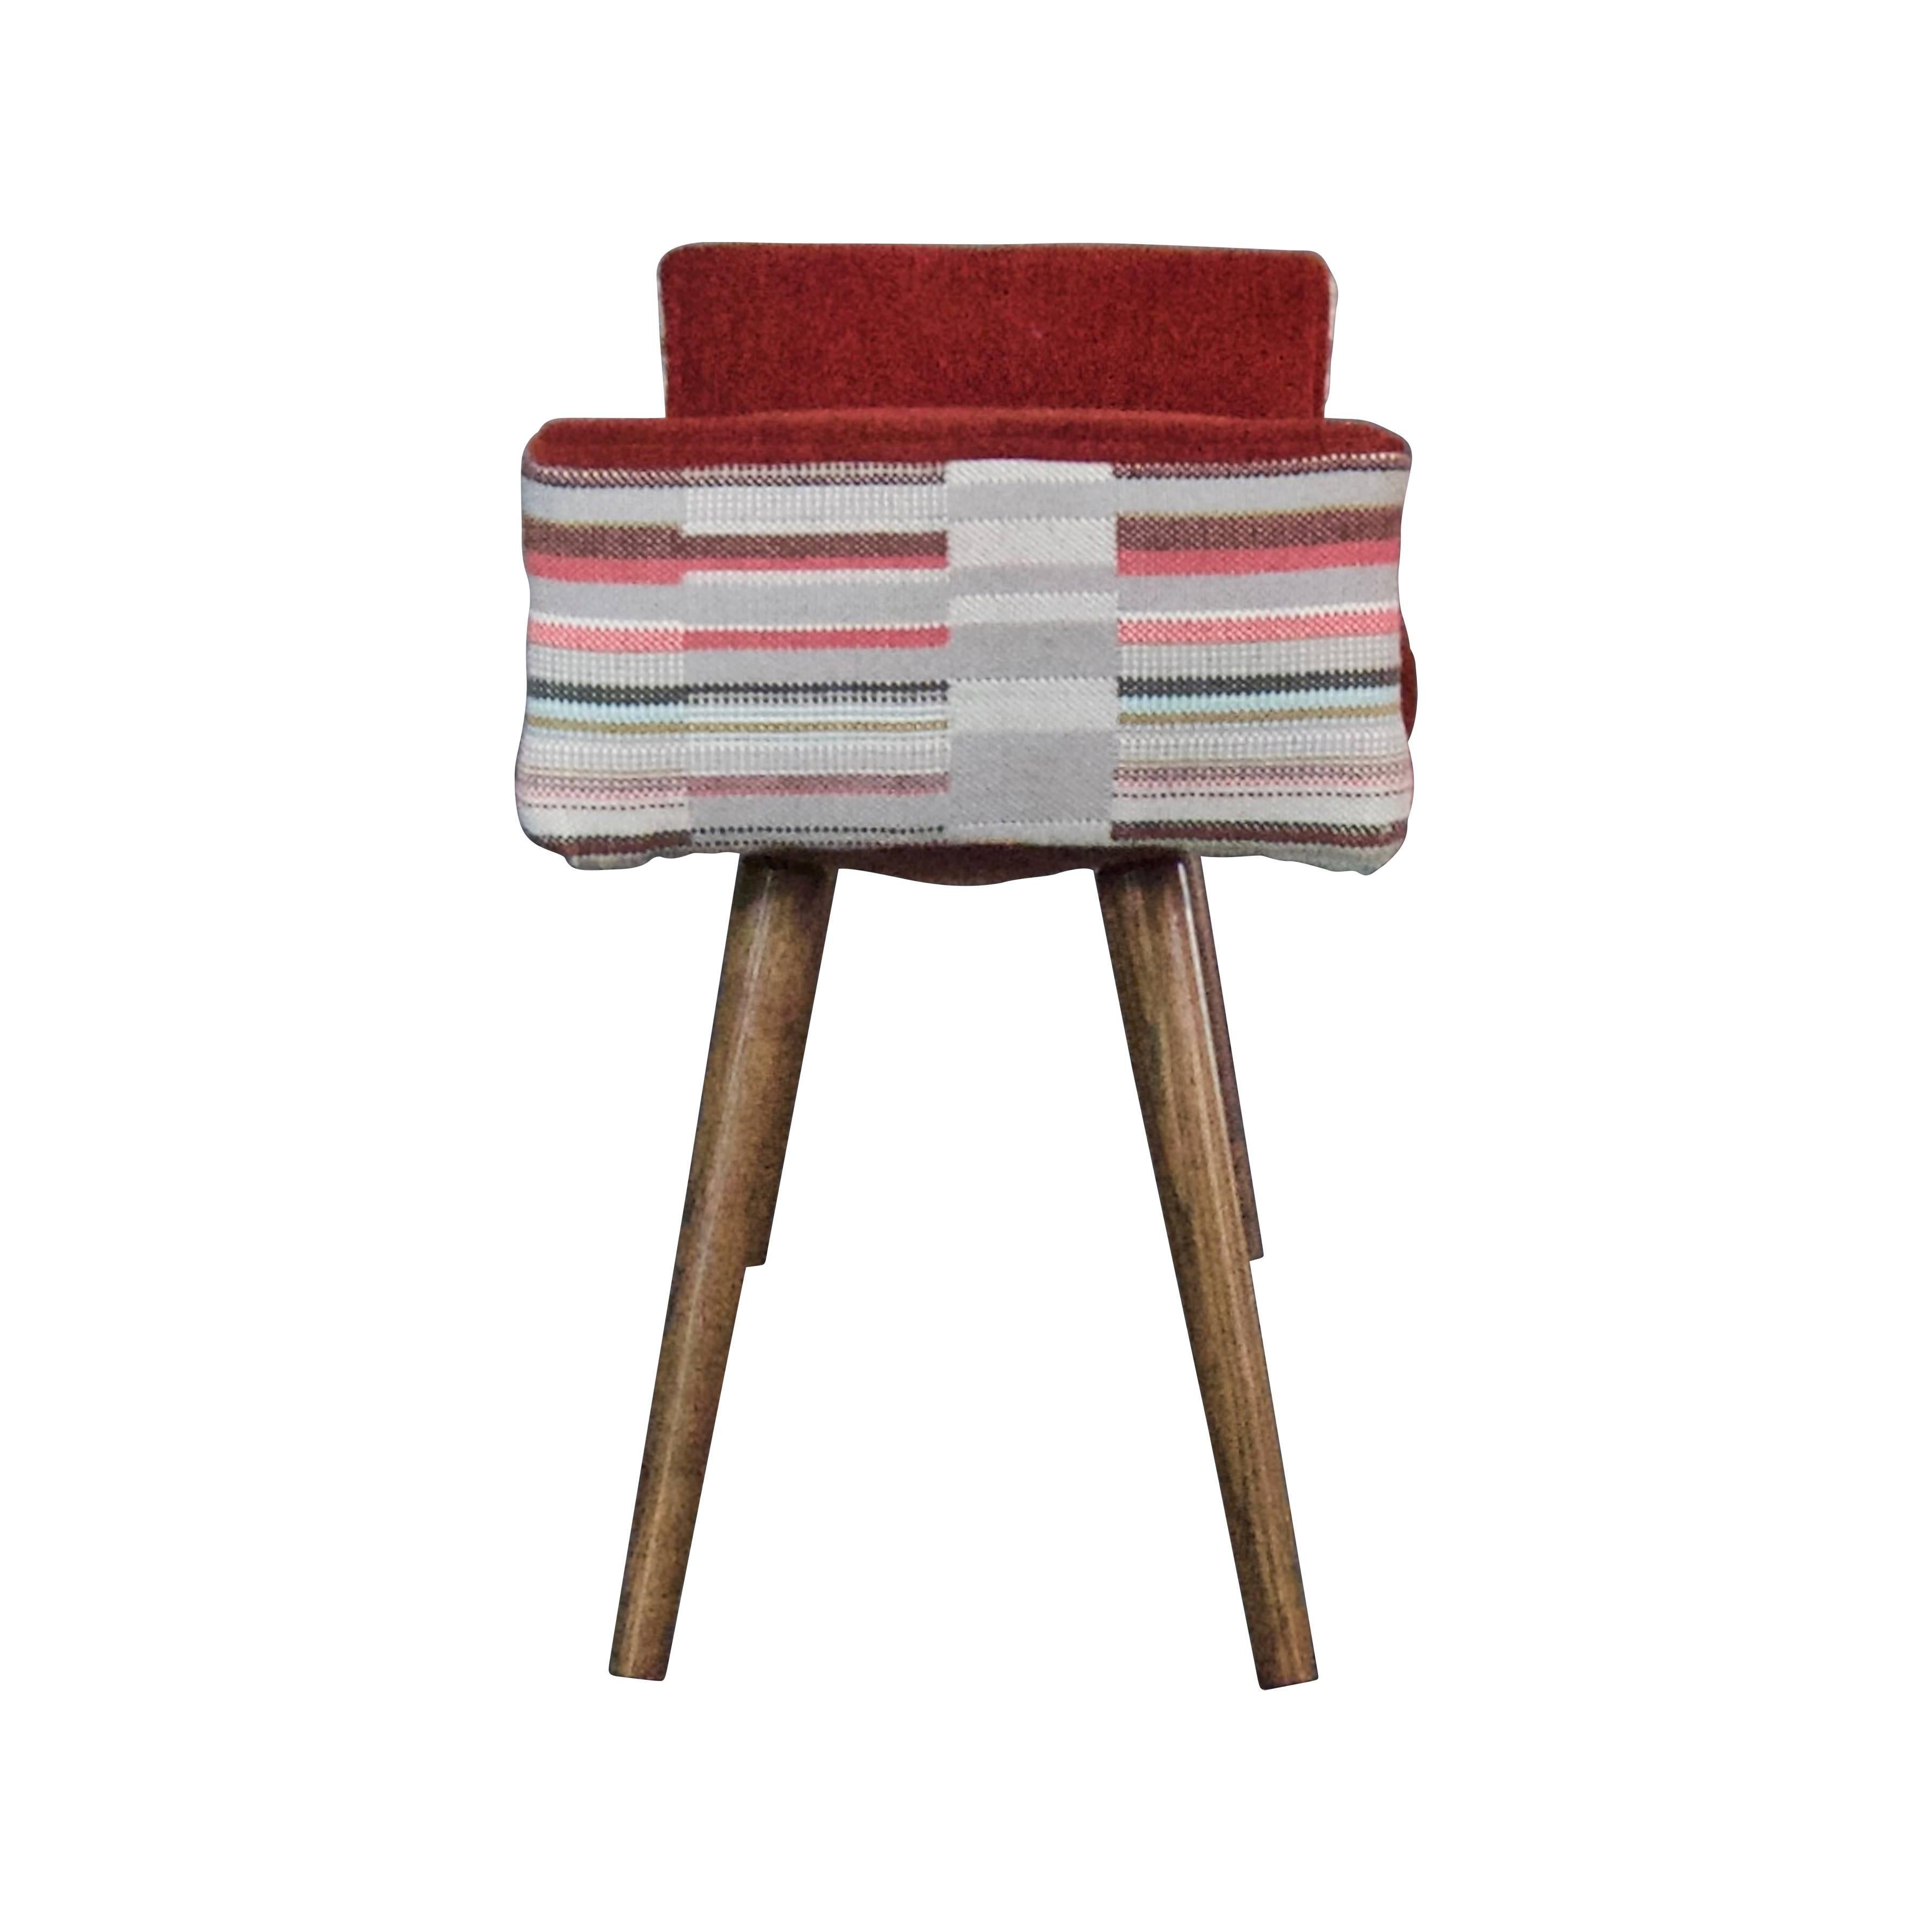 American Studio Series: Backless Vanity Size Stool in Gray Geometric with Flame Red Seat For Sale